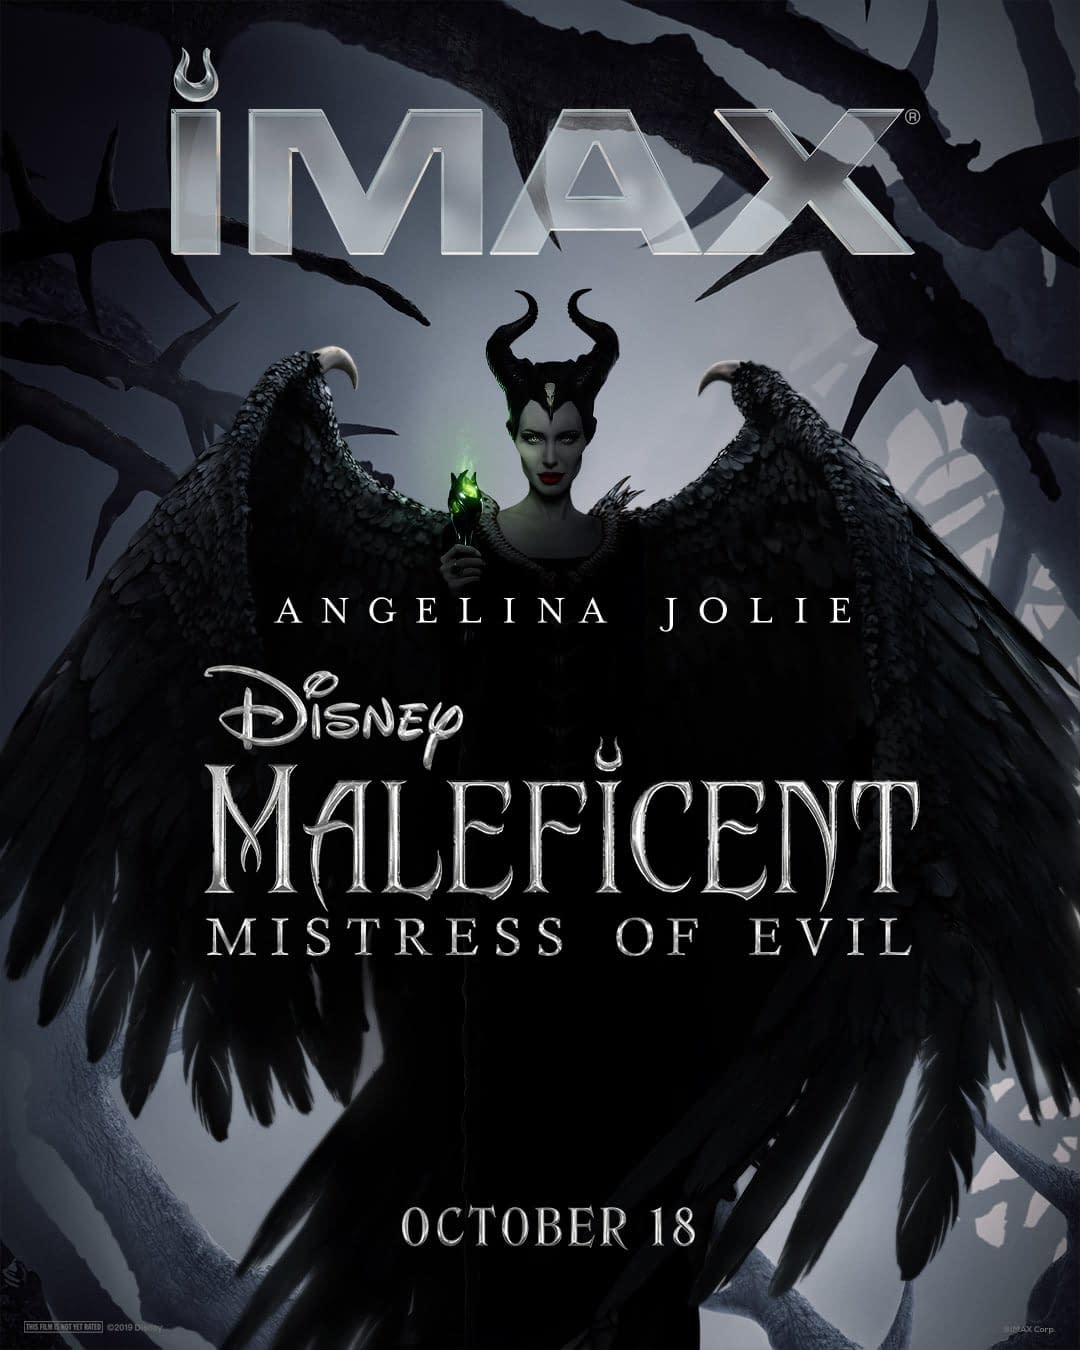 New Posters and TV Spot for "Maleficent: Mistress of Evil"